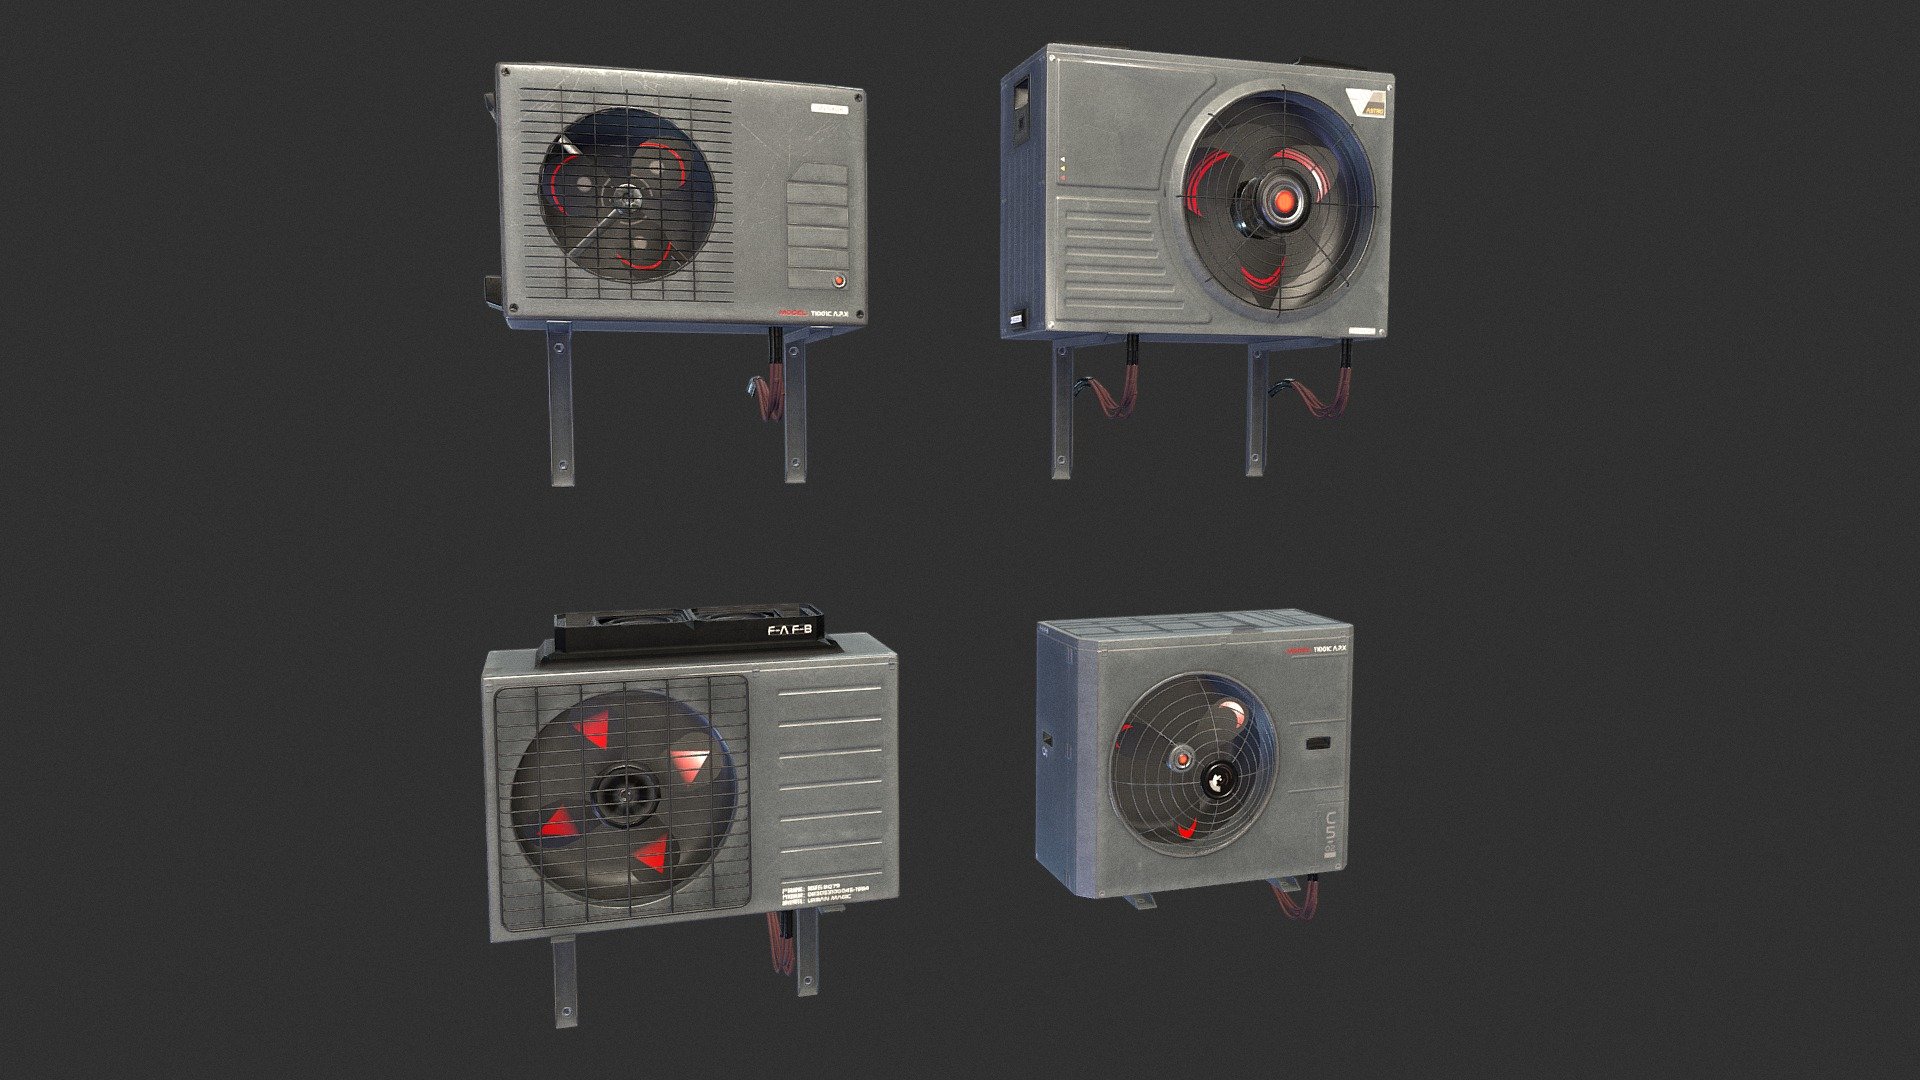 3D model of LowPoly Sci-fi Airconditioning PBR





8k Resolution of textures




Originally created with 3ds Max 2018




Textured created with Substance Painter




Texture Set:



Diffuse, Base Color, IOR, gloss, heigh, ior, normal, reflection, specular, AO, metallic, roughness

Special notes:




.fbx format is recommended for import in other 3d software. If your software doesn't support .fbx format, please use 3ds format; .obj, format was exported from 3ds Max.

The geometry for .obj format is set to tris 3d model